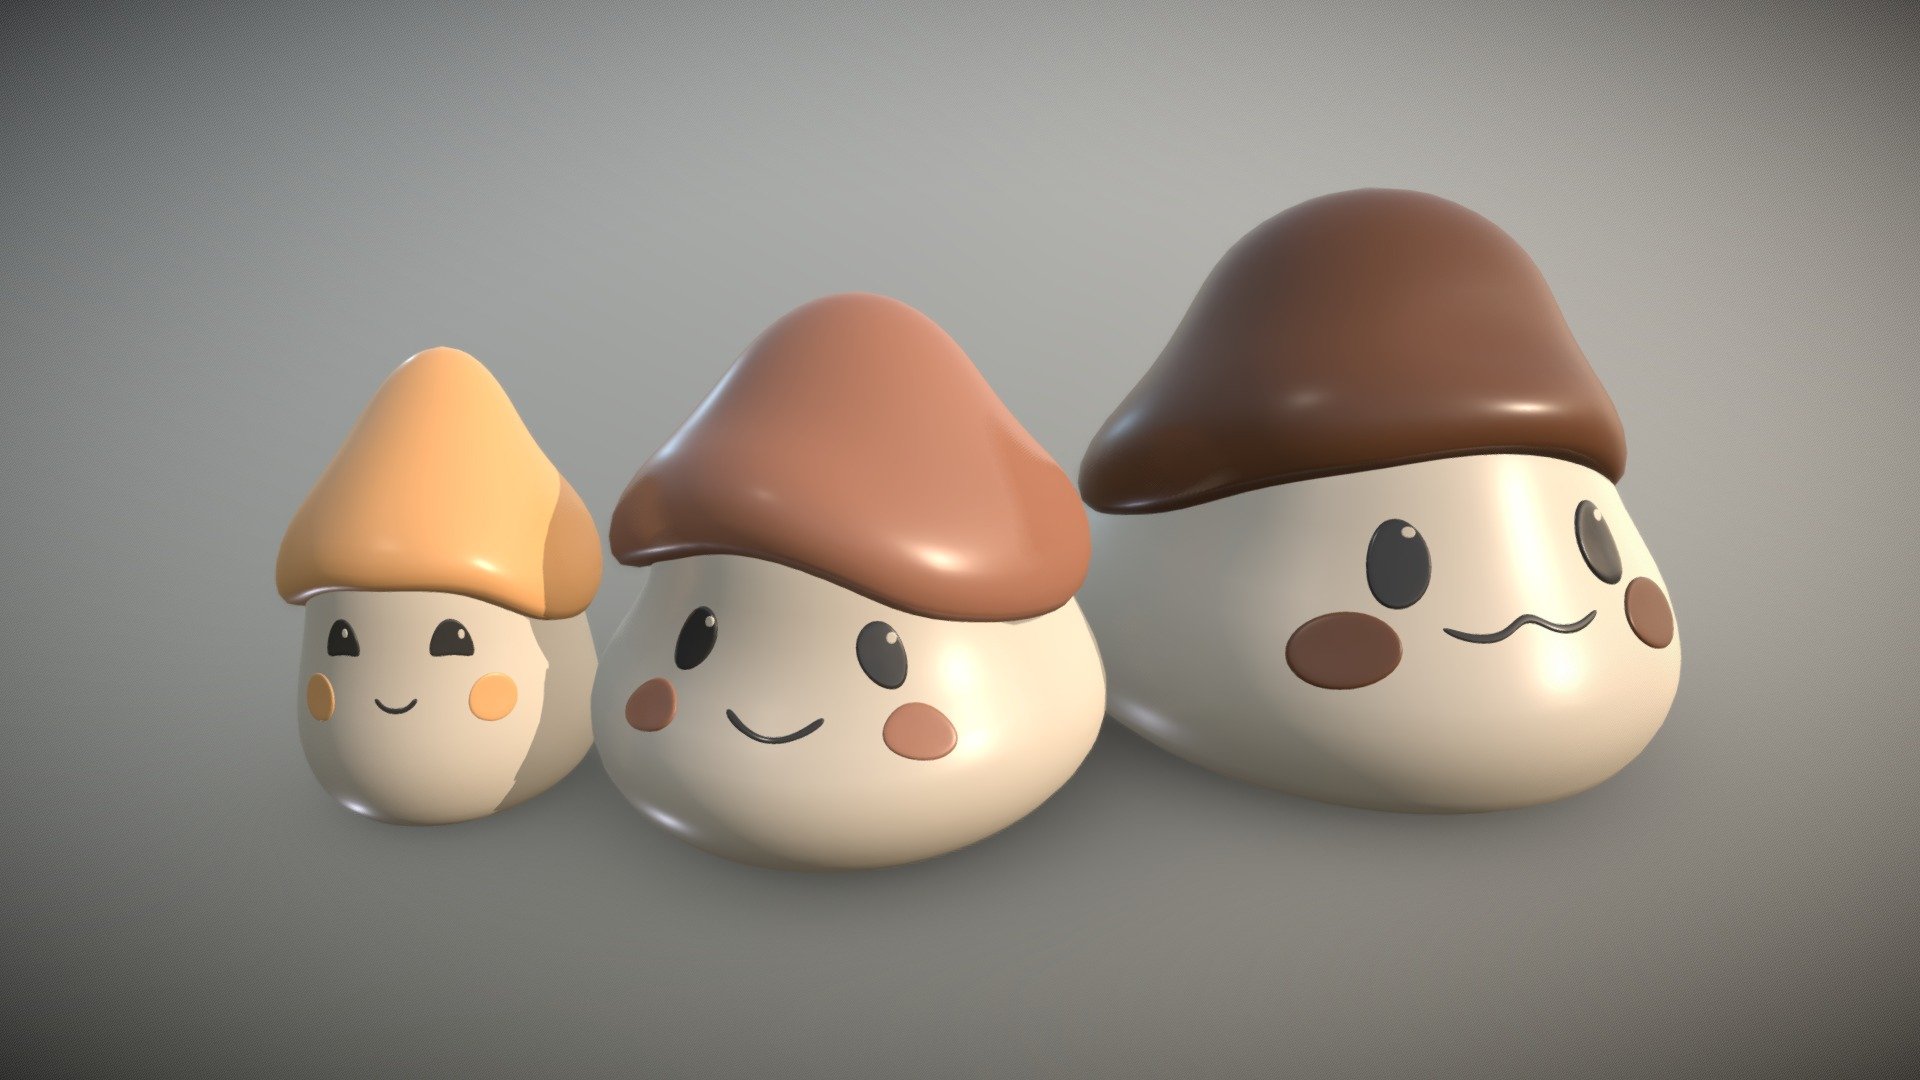 Some Cute Little Mushroom characters I made. Created these characters with Blender 3d model